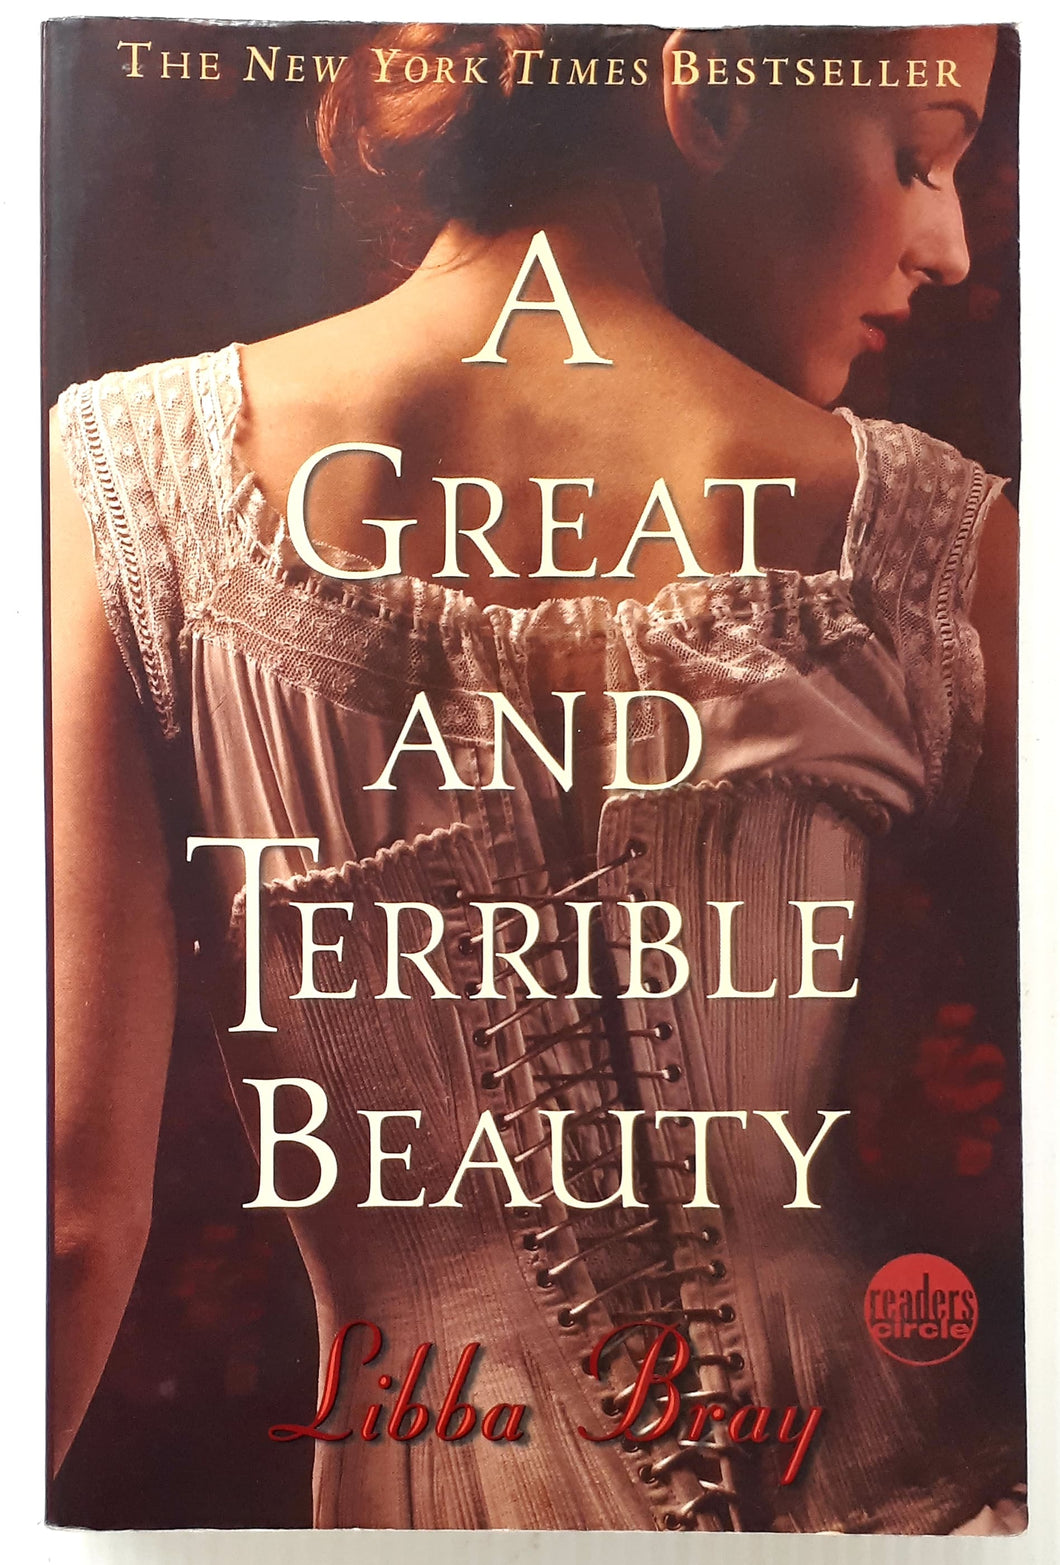 A GREAT AND TERRIBLE BEAUTY - Libba Bray